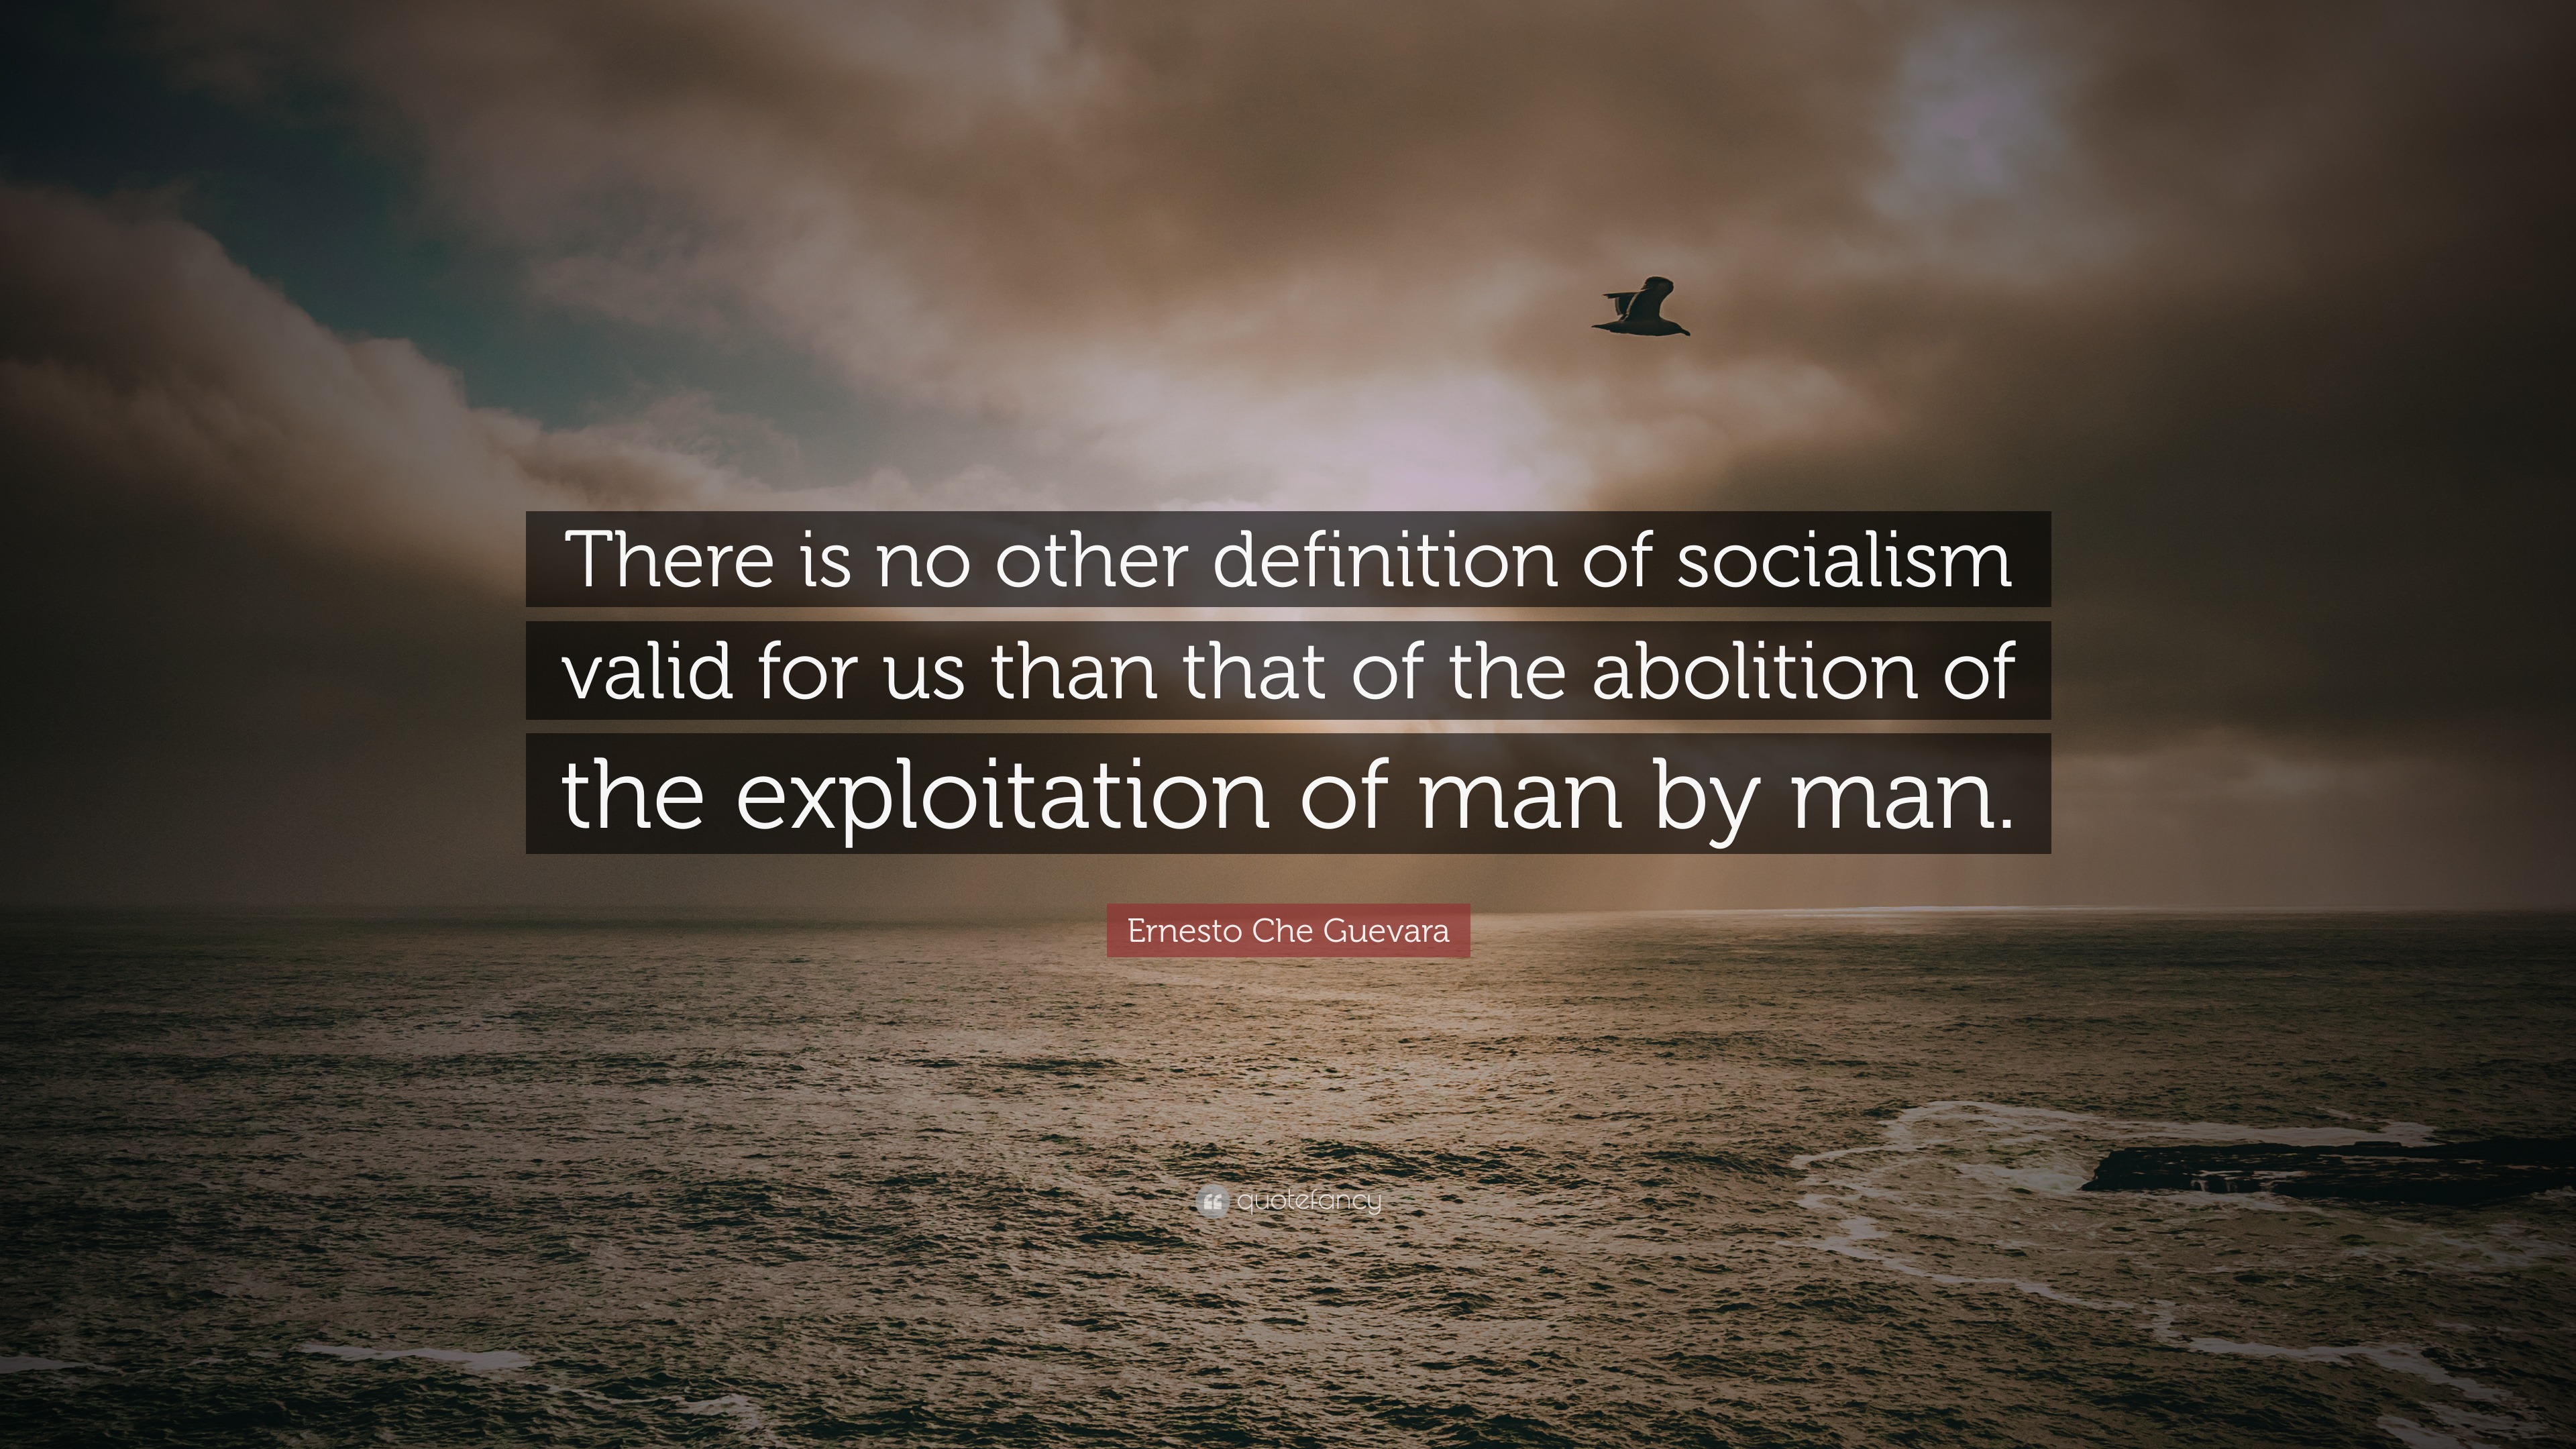 Ernesto Che Guevara Quote: “There Is No Other Definition Of Socialism Valid For Us Than That